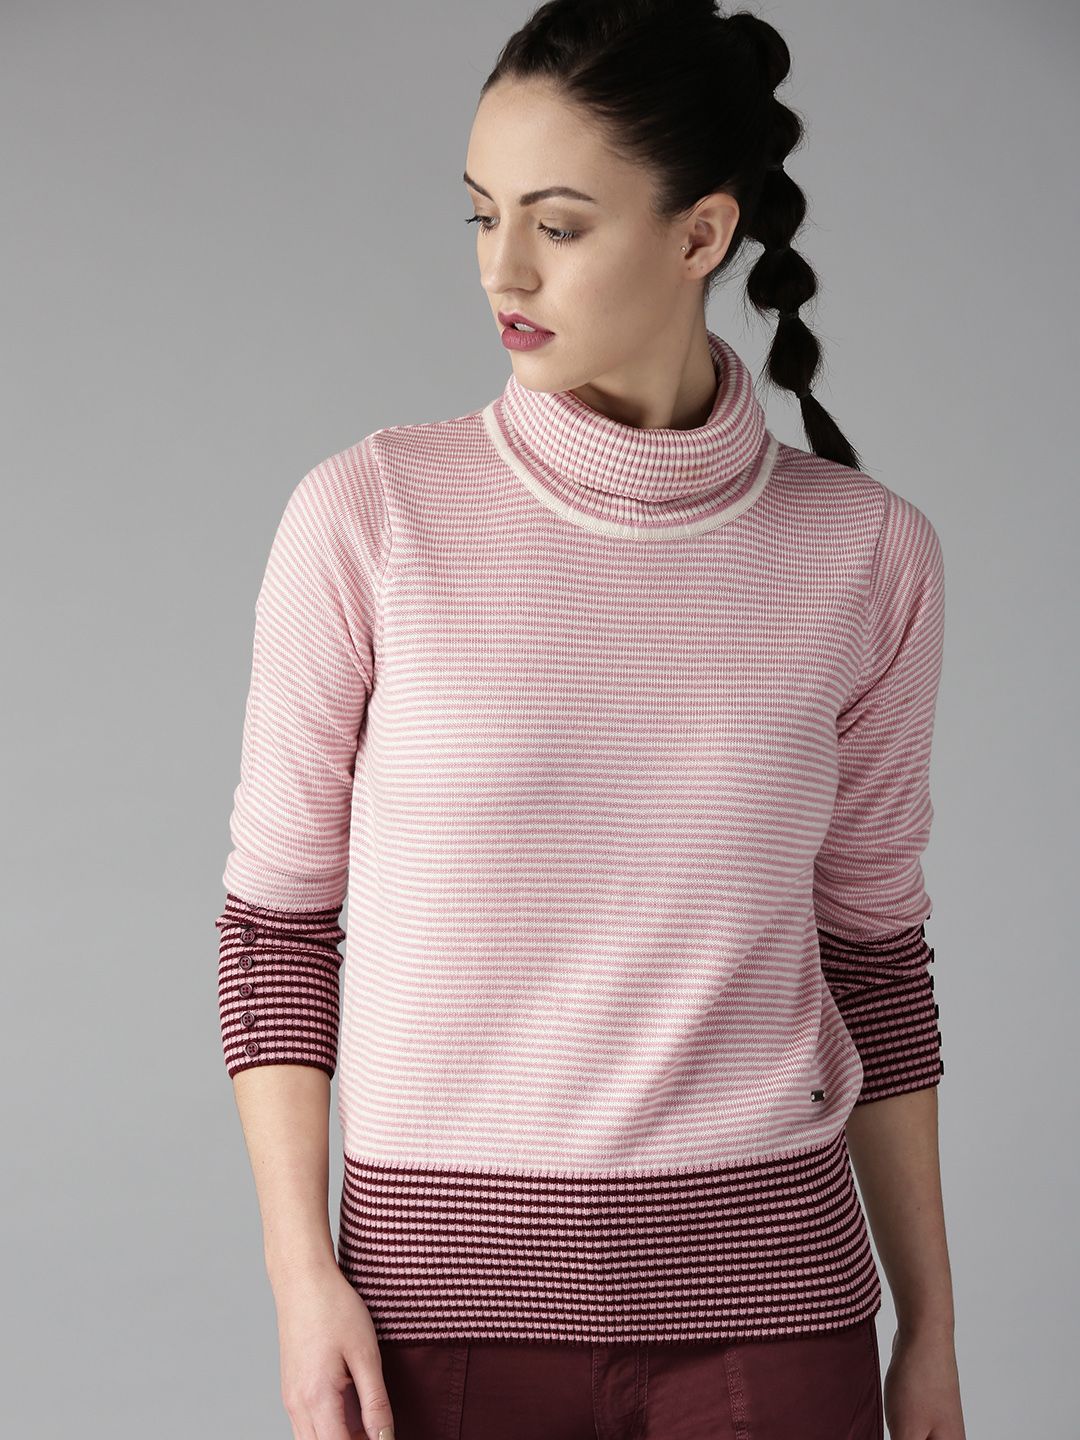 The Roadster Lifestyle Co Women Pink & Off-White Striped Sweater Price in India